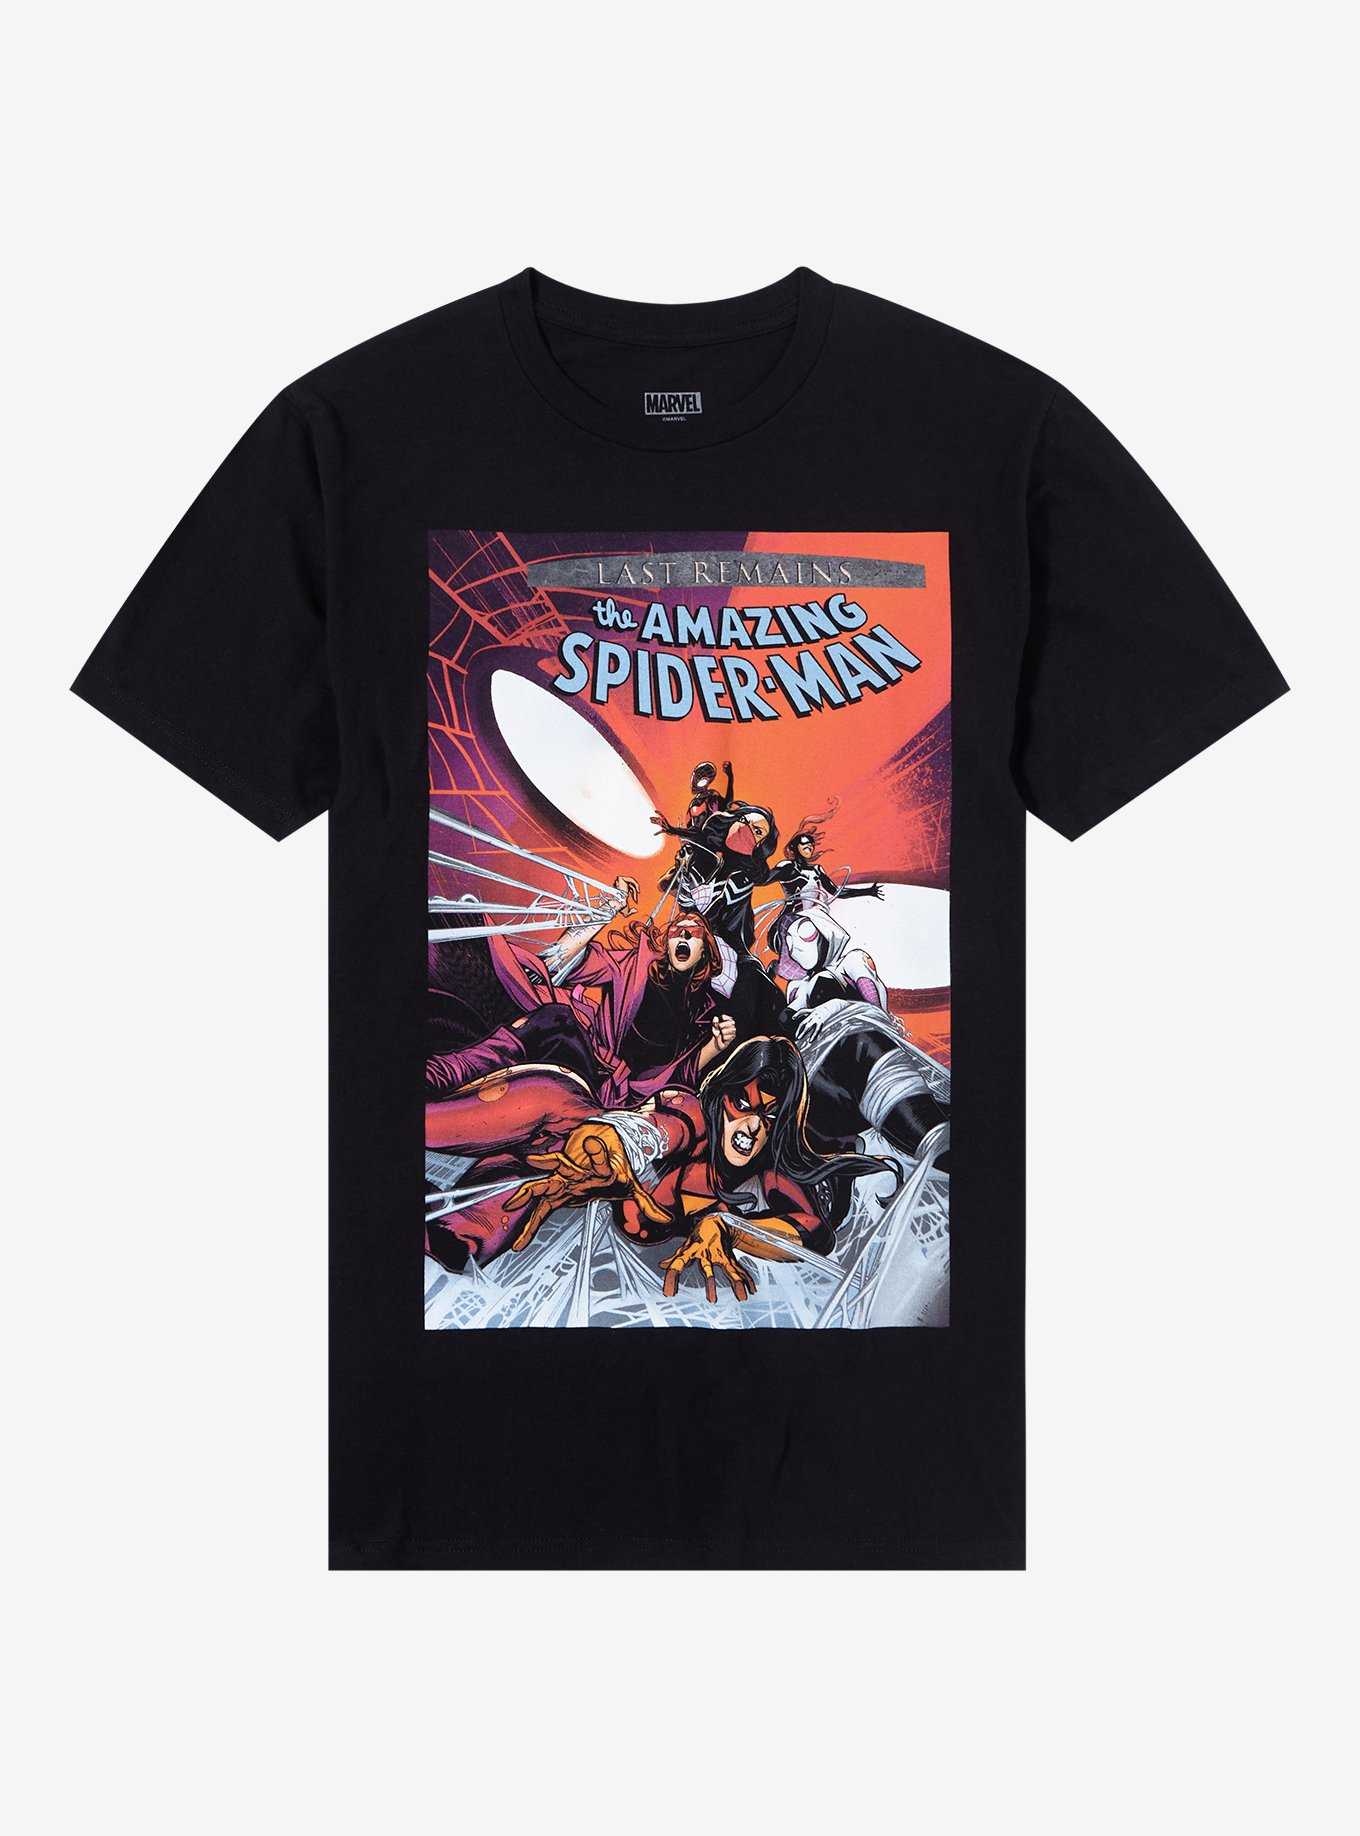 Marvel The Amazing Spider-Man Last Remains Comic Cover T-Shirt, , hi-res